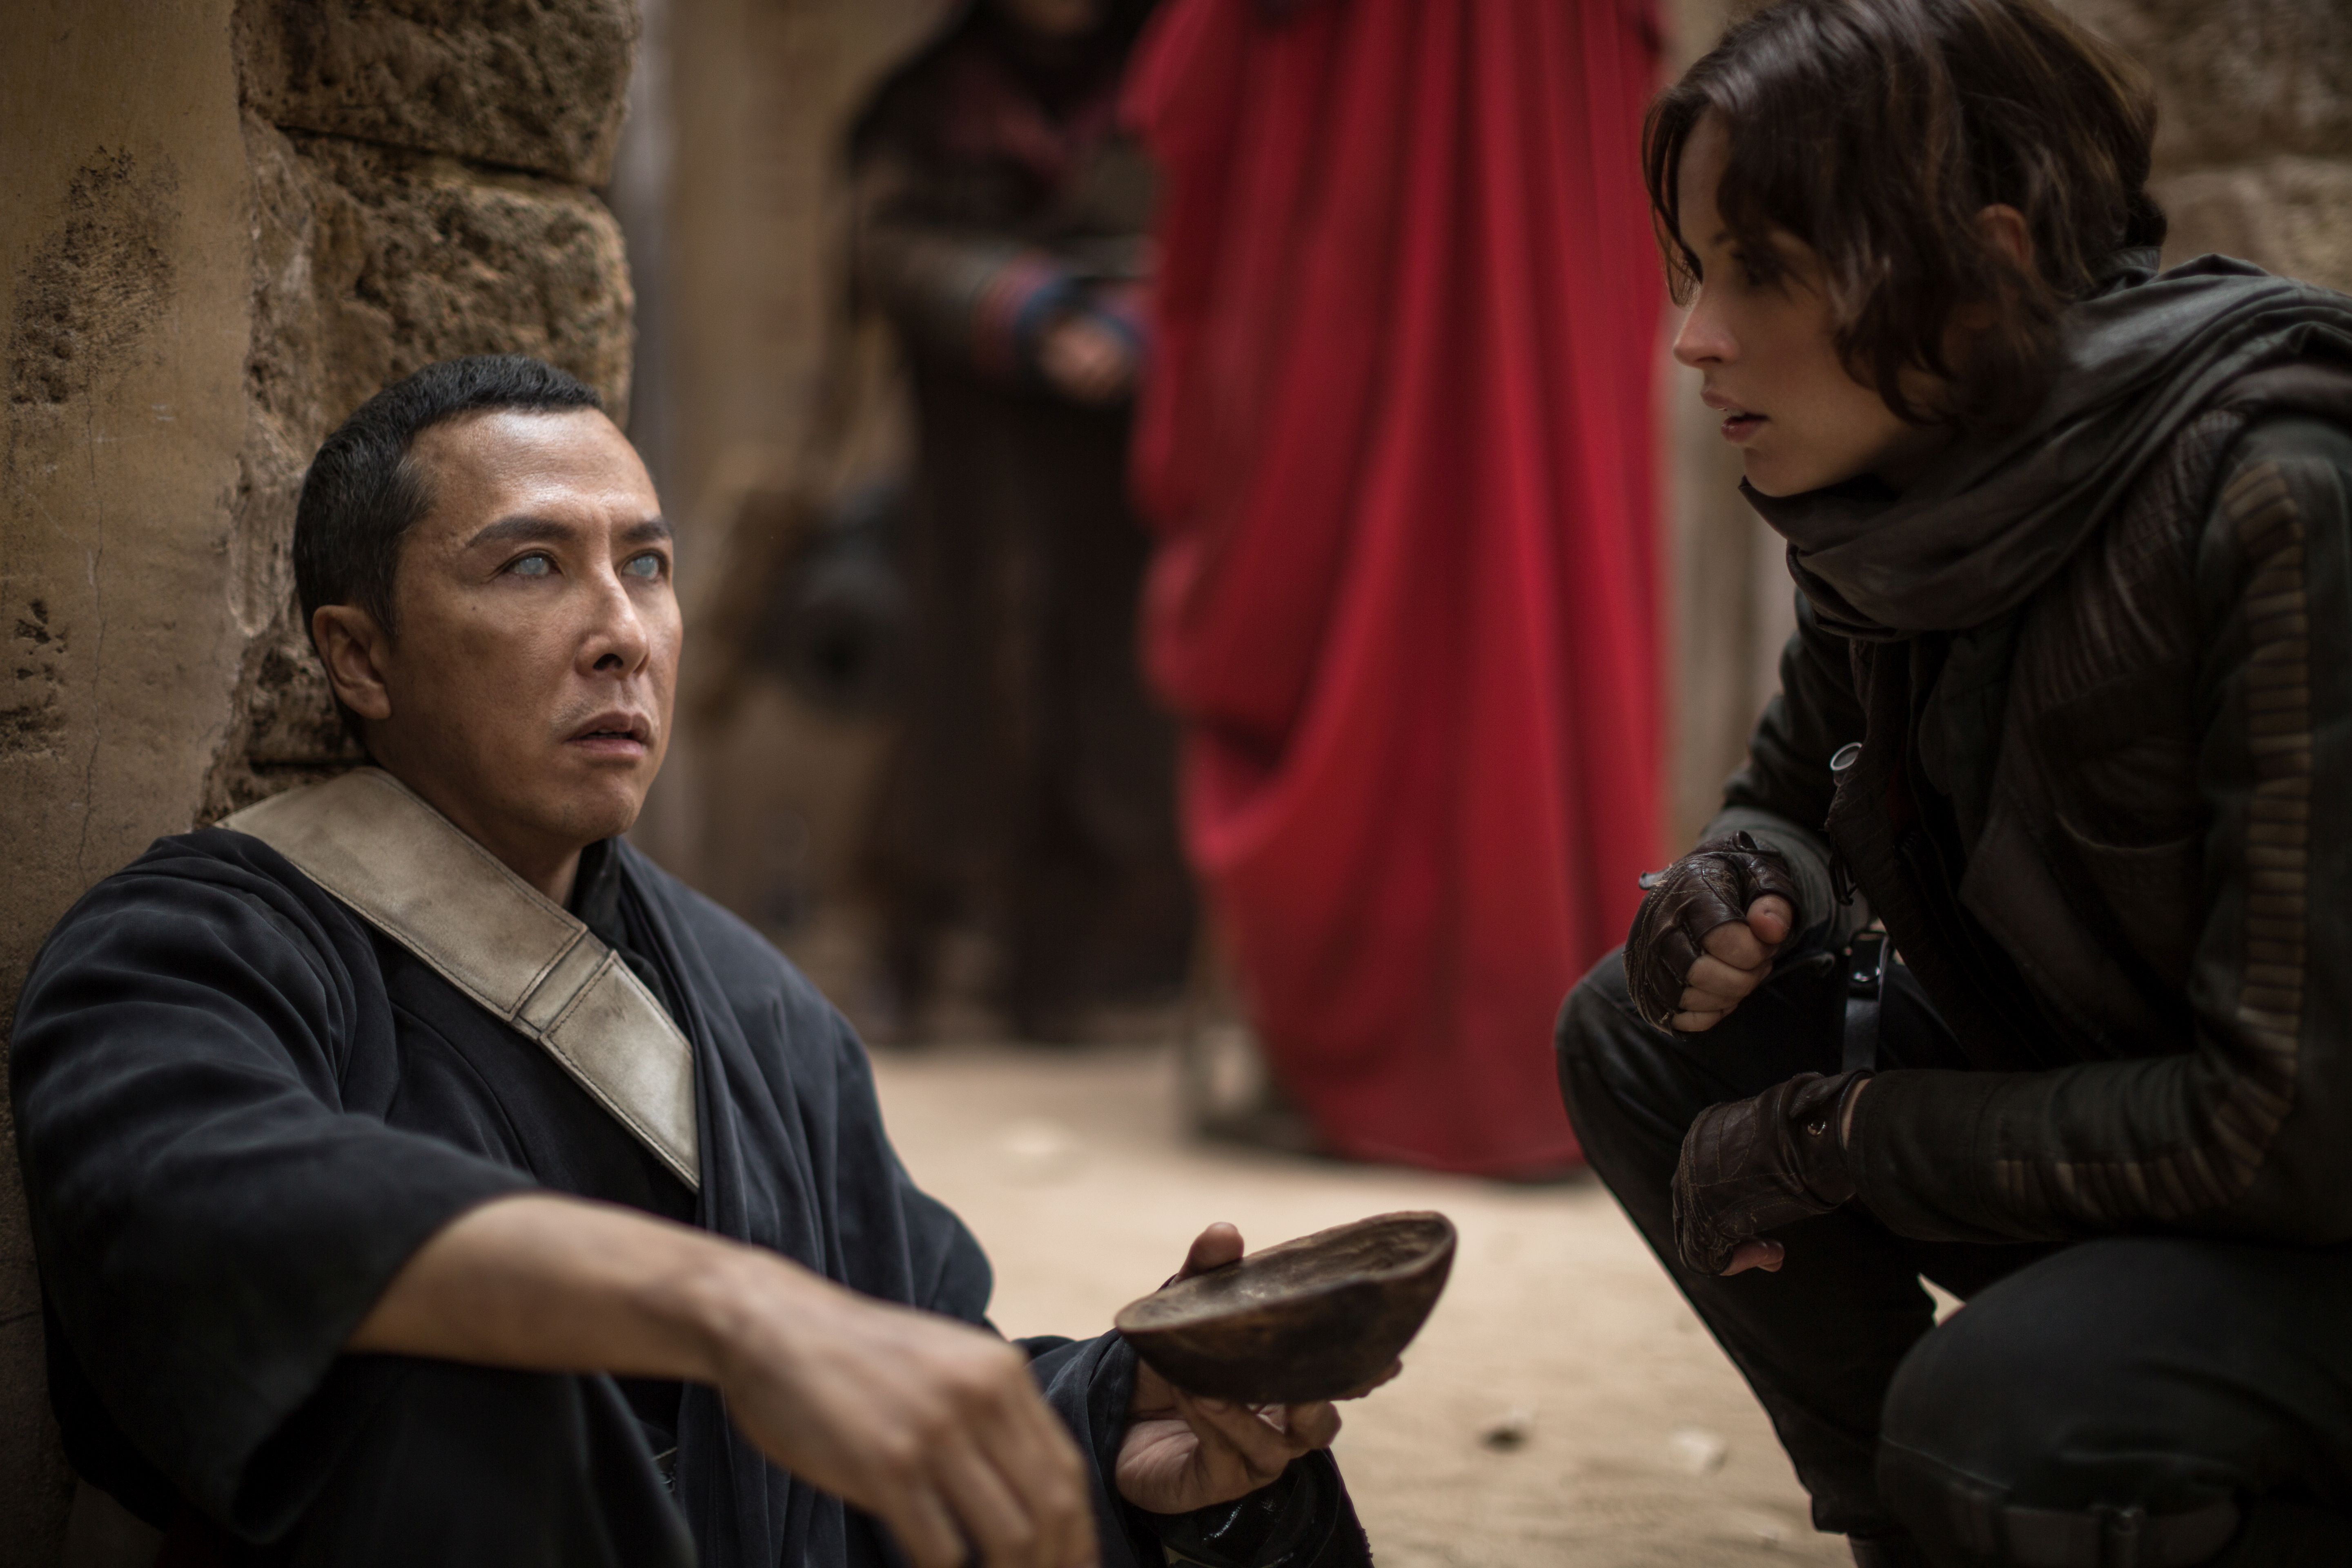 Rogue One: A Star Wars Story..L to R: Chirrut Imwe (Donnie Yen) and Jyn Erso (Felicity Jones)..Ph: Jonathan Olley..© 2016 Lucasfilm Ltd. All Rights Reserved.